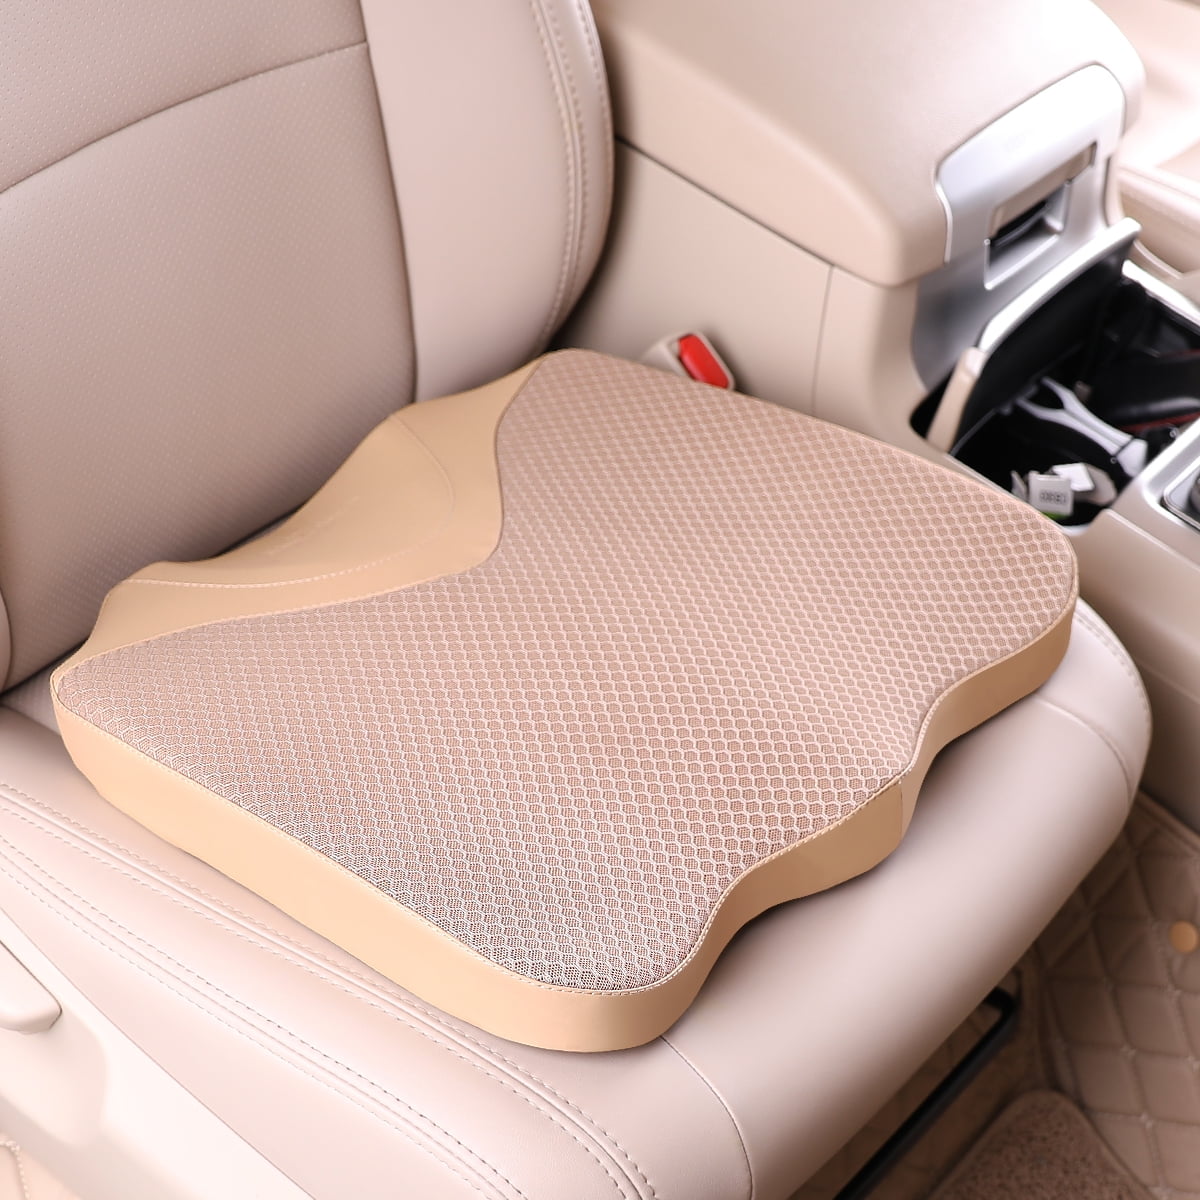 SUV Alleviate Auto Seat Angle Problems Back Support Cushion Universal Fit for Car KINGLETING Lumbar Support Pillow for Car One Piece Design of Memory Foam Lumbar Cushion Truck 